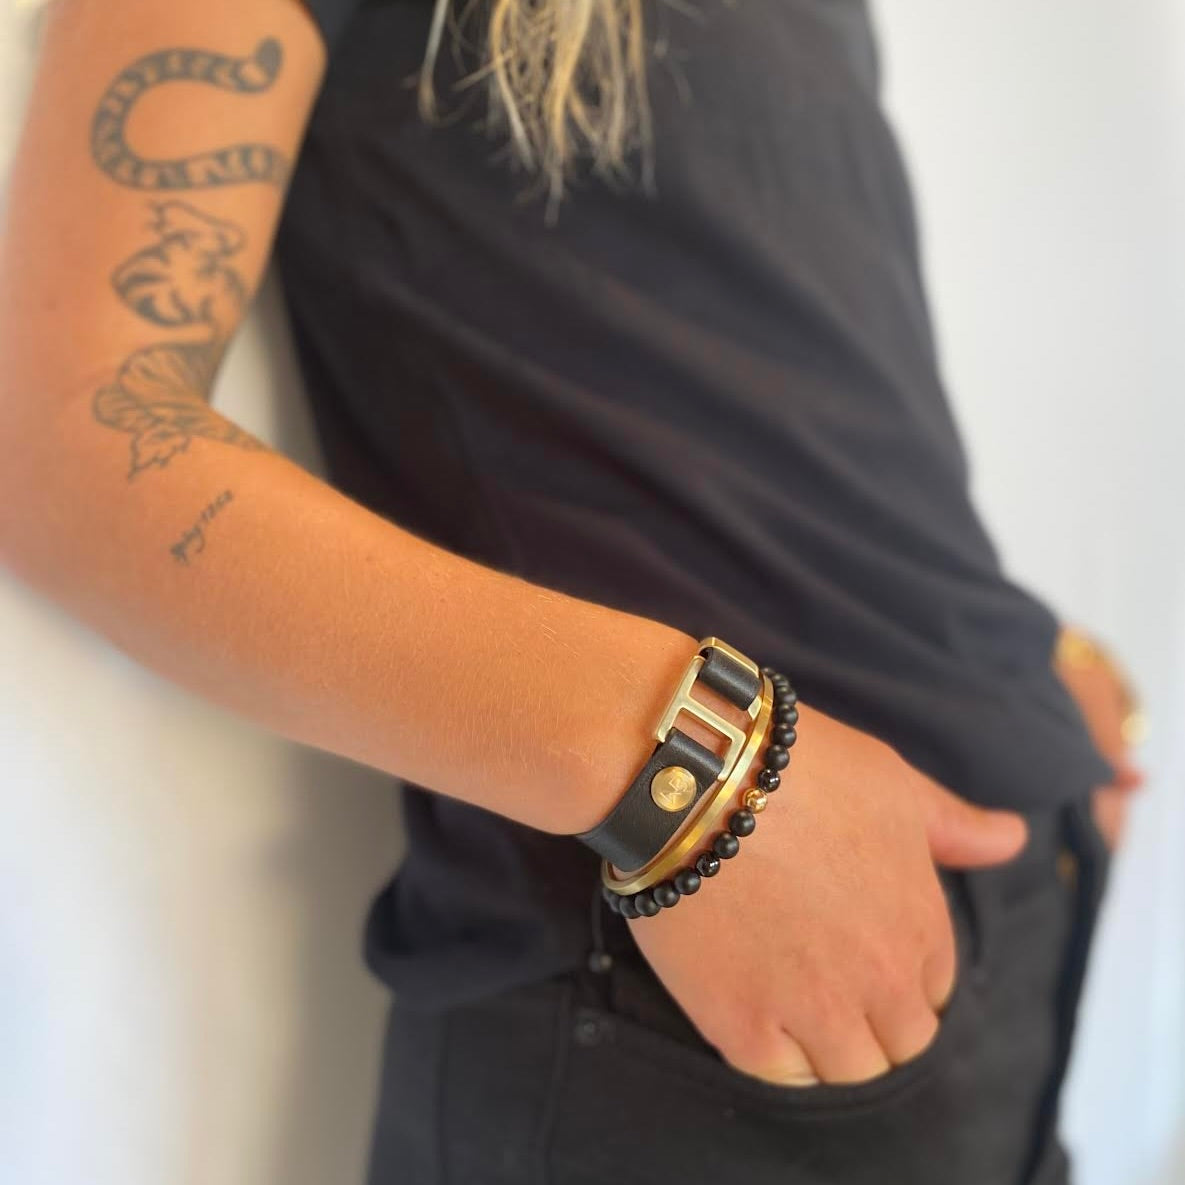 Trendy black onyx beads accented two black spinel beads and your choice of 14K white, rose or yellow gold beads. Hand knotted adjustable cord for a perfect fit.  Made by WristBend